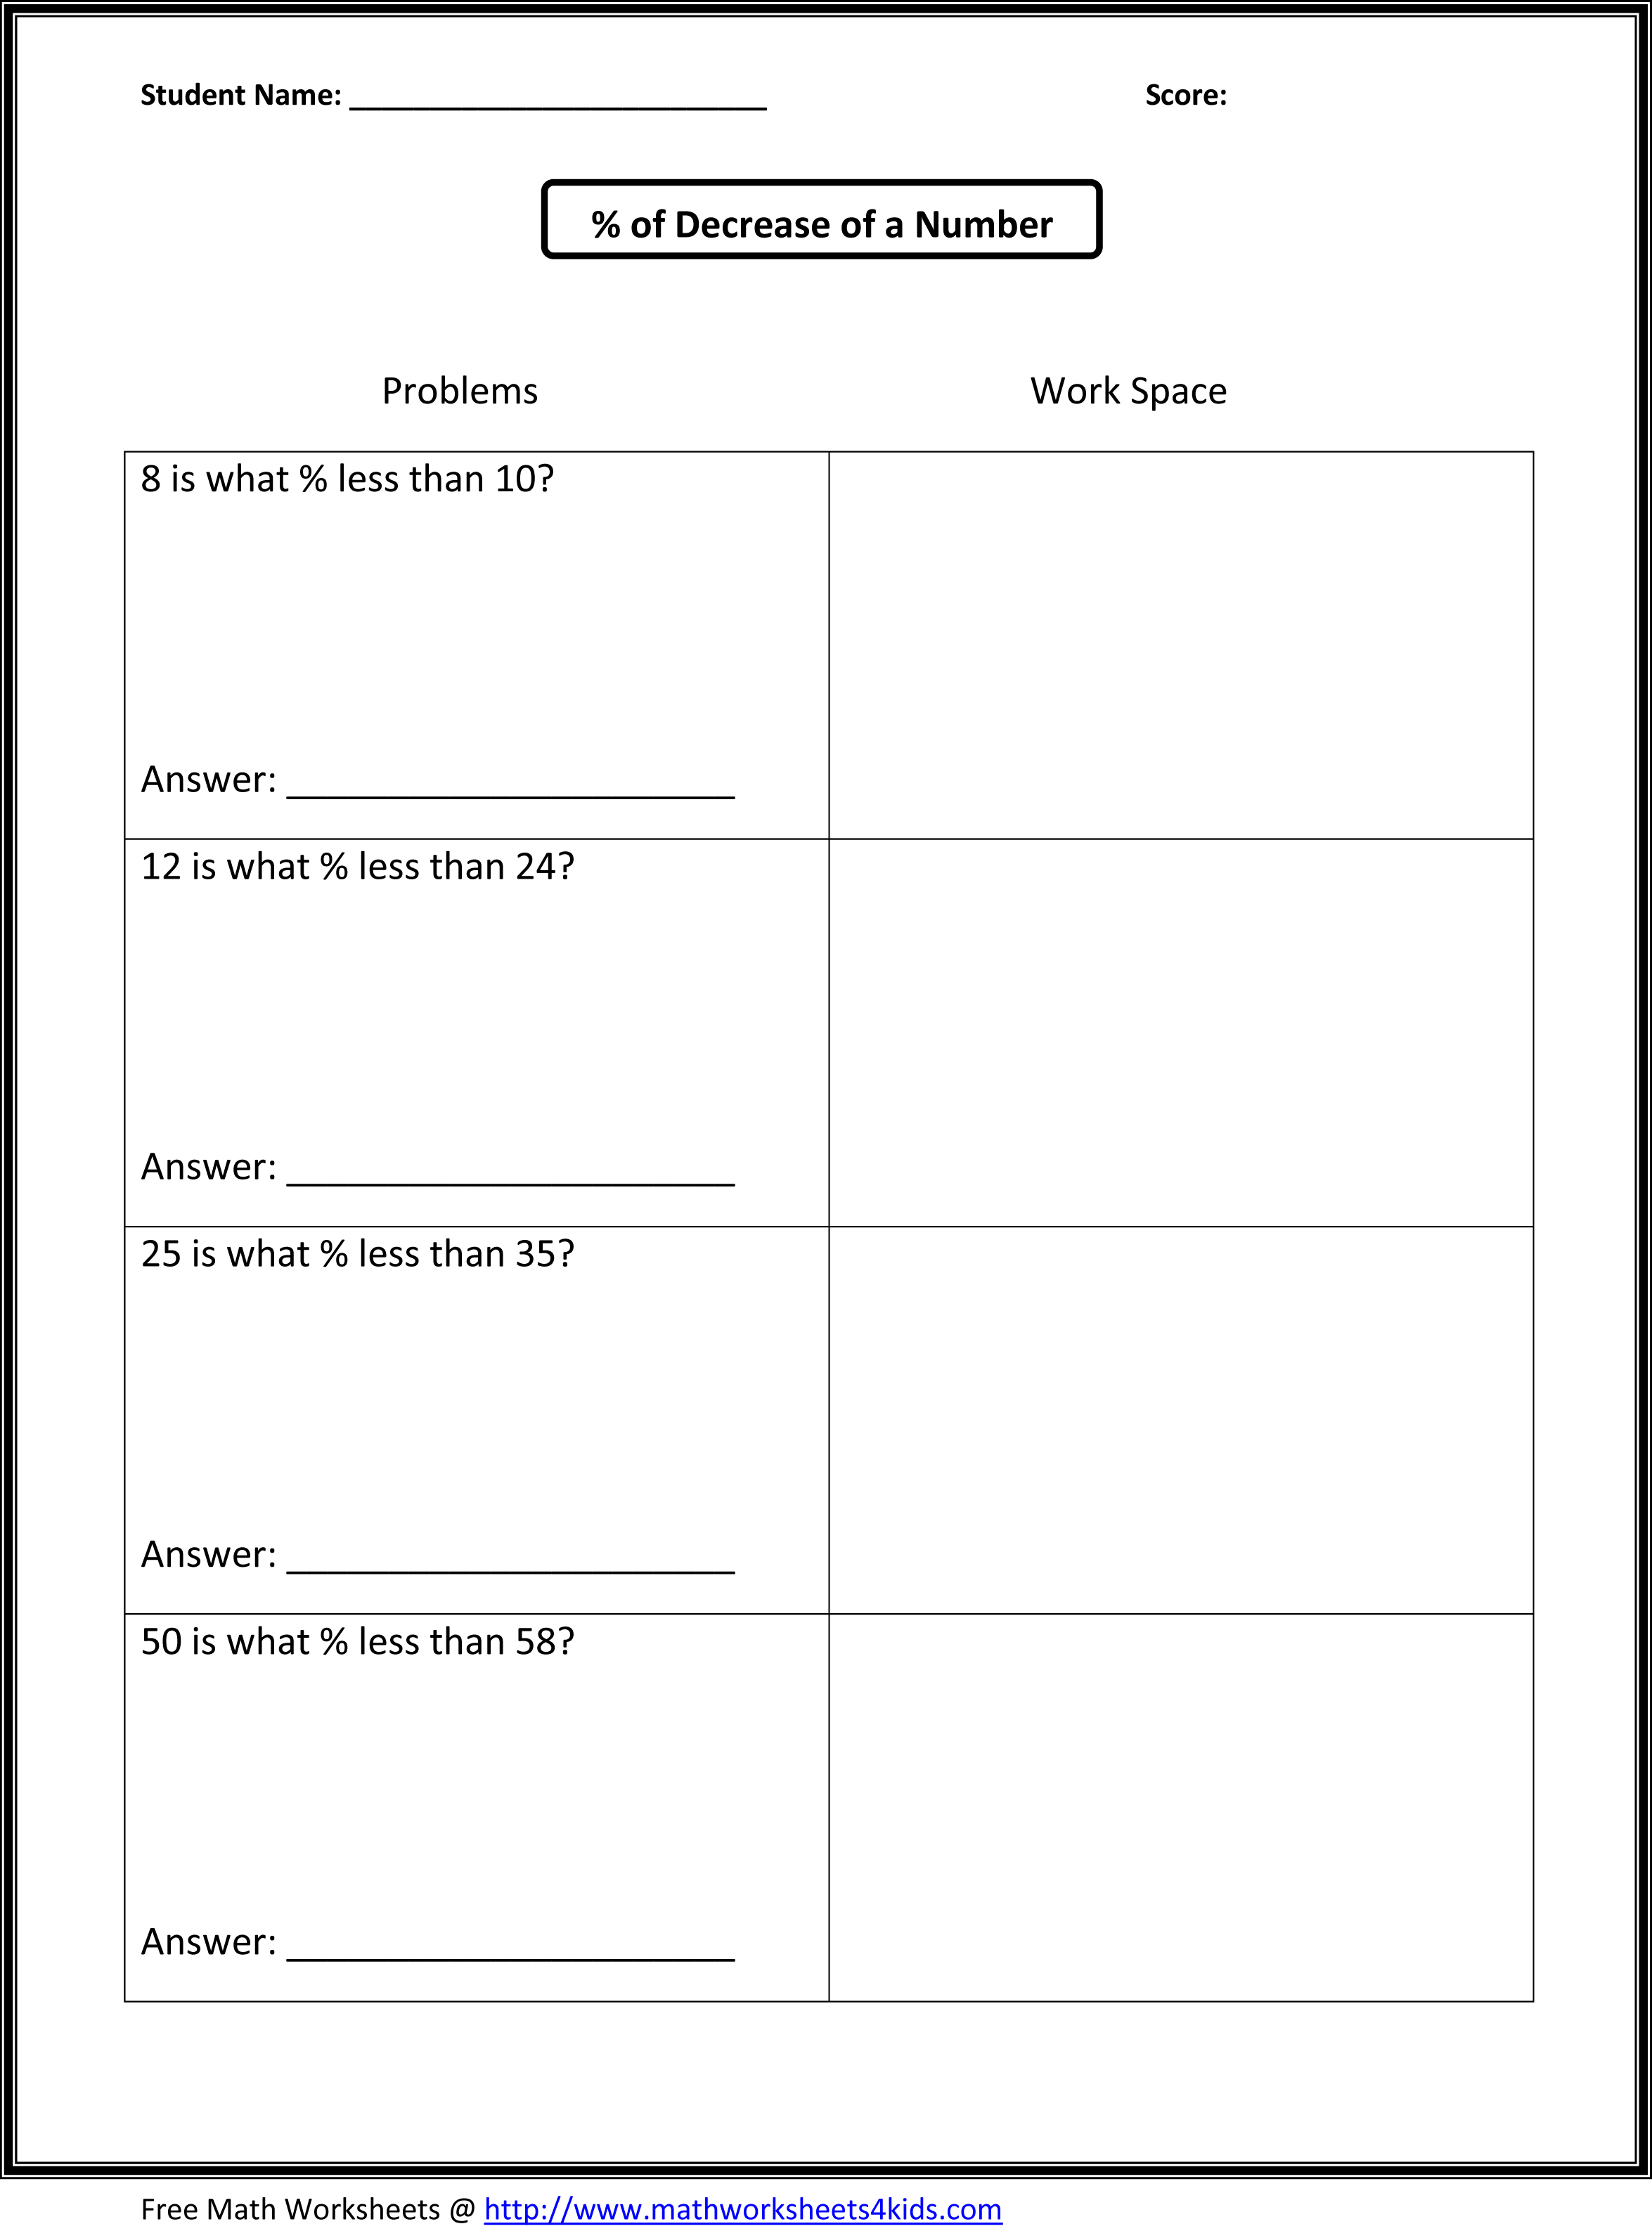 Ratios And Unit Rate - Lessons - Blendspace Throughout Unit Rate Worksheet 6th Grade